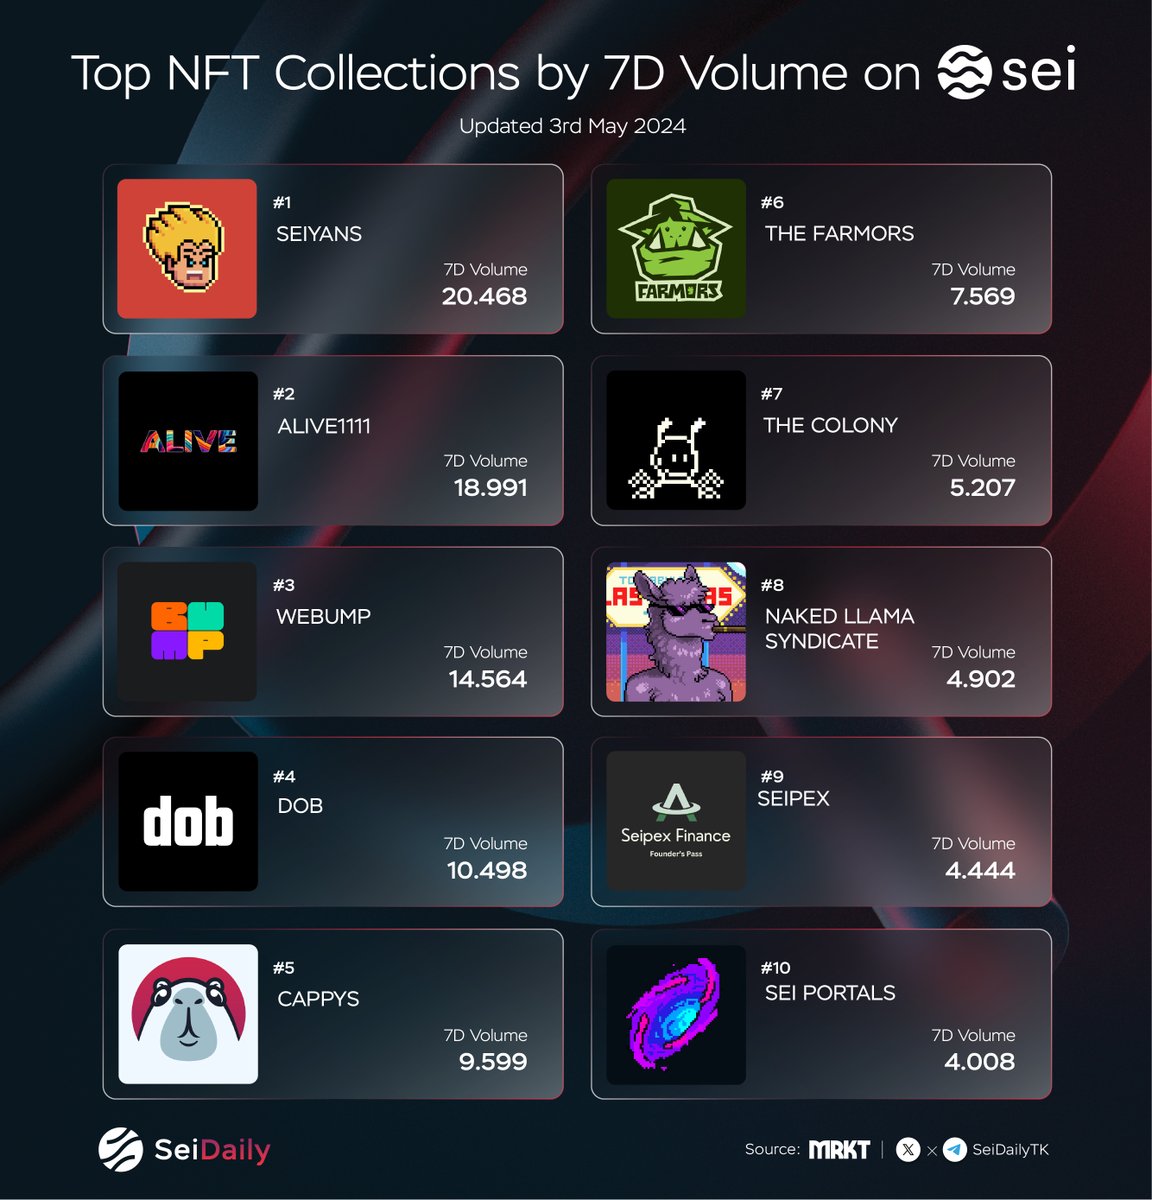 Top NFT Collections by 7D Volume on Sei🔴💨 @seiyansnft @ALIVE1111nfts @webump_ @dobnfts @CappysNFT @Silo_Stake @TheColonyNFT__ @llamasyndicate @Seipex_Fi @seiportals